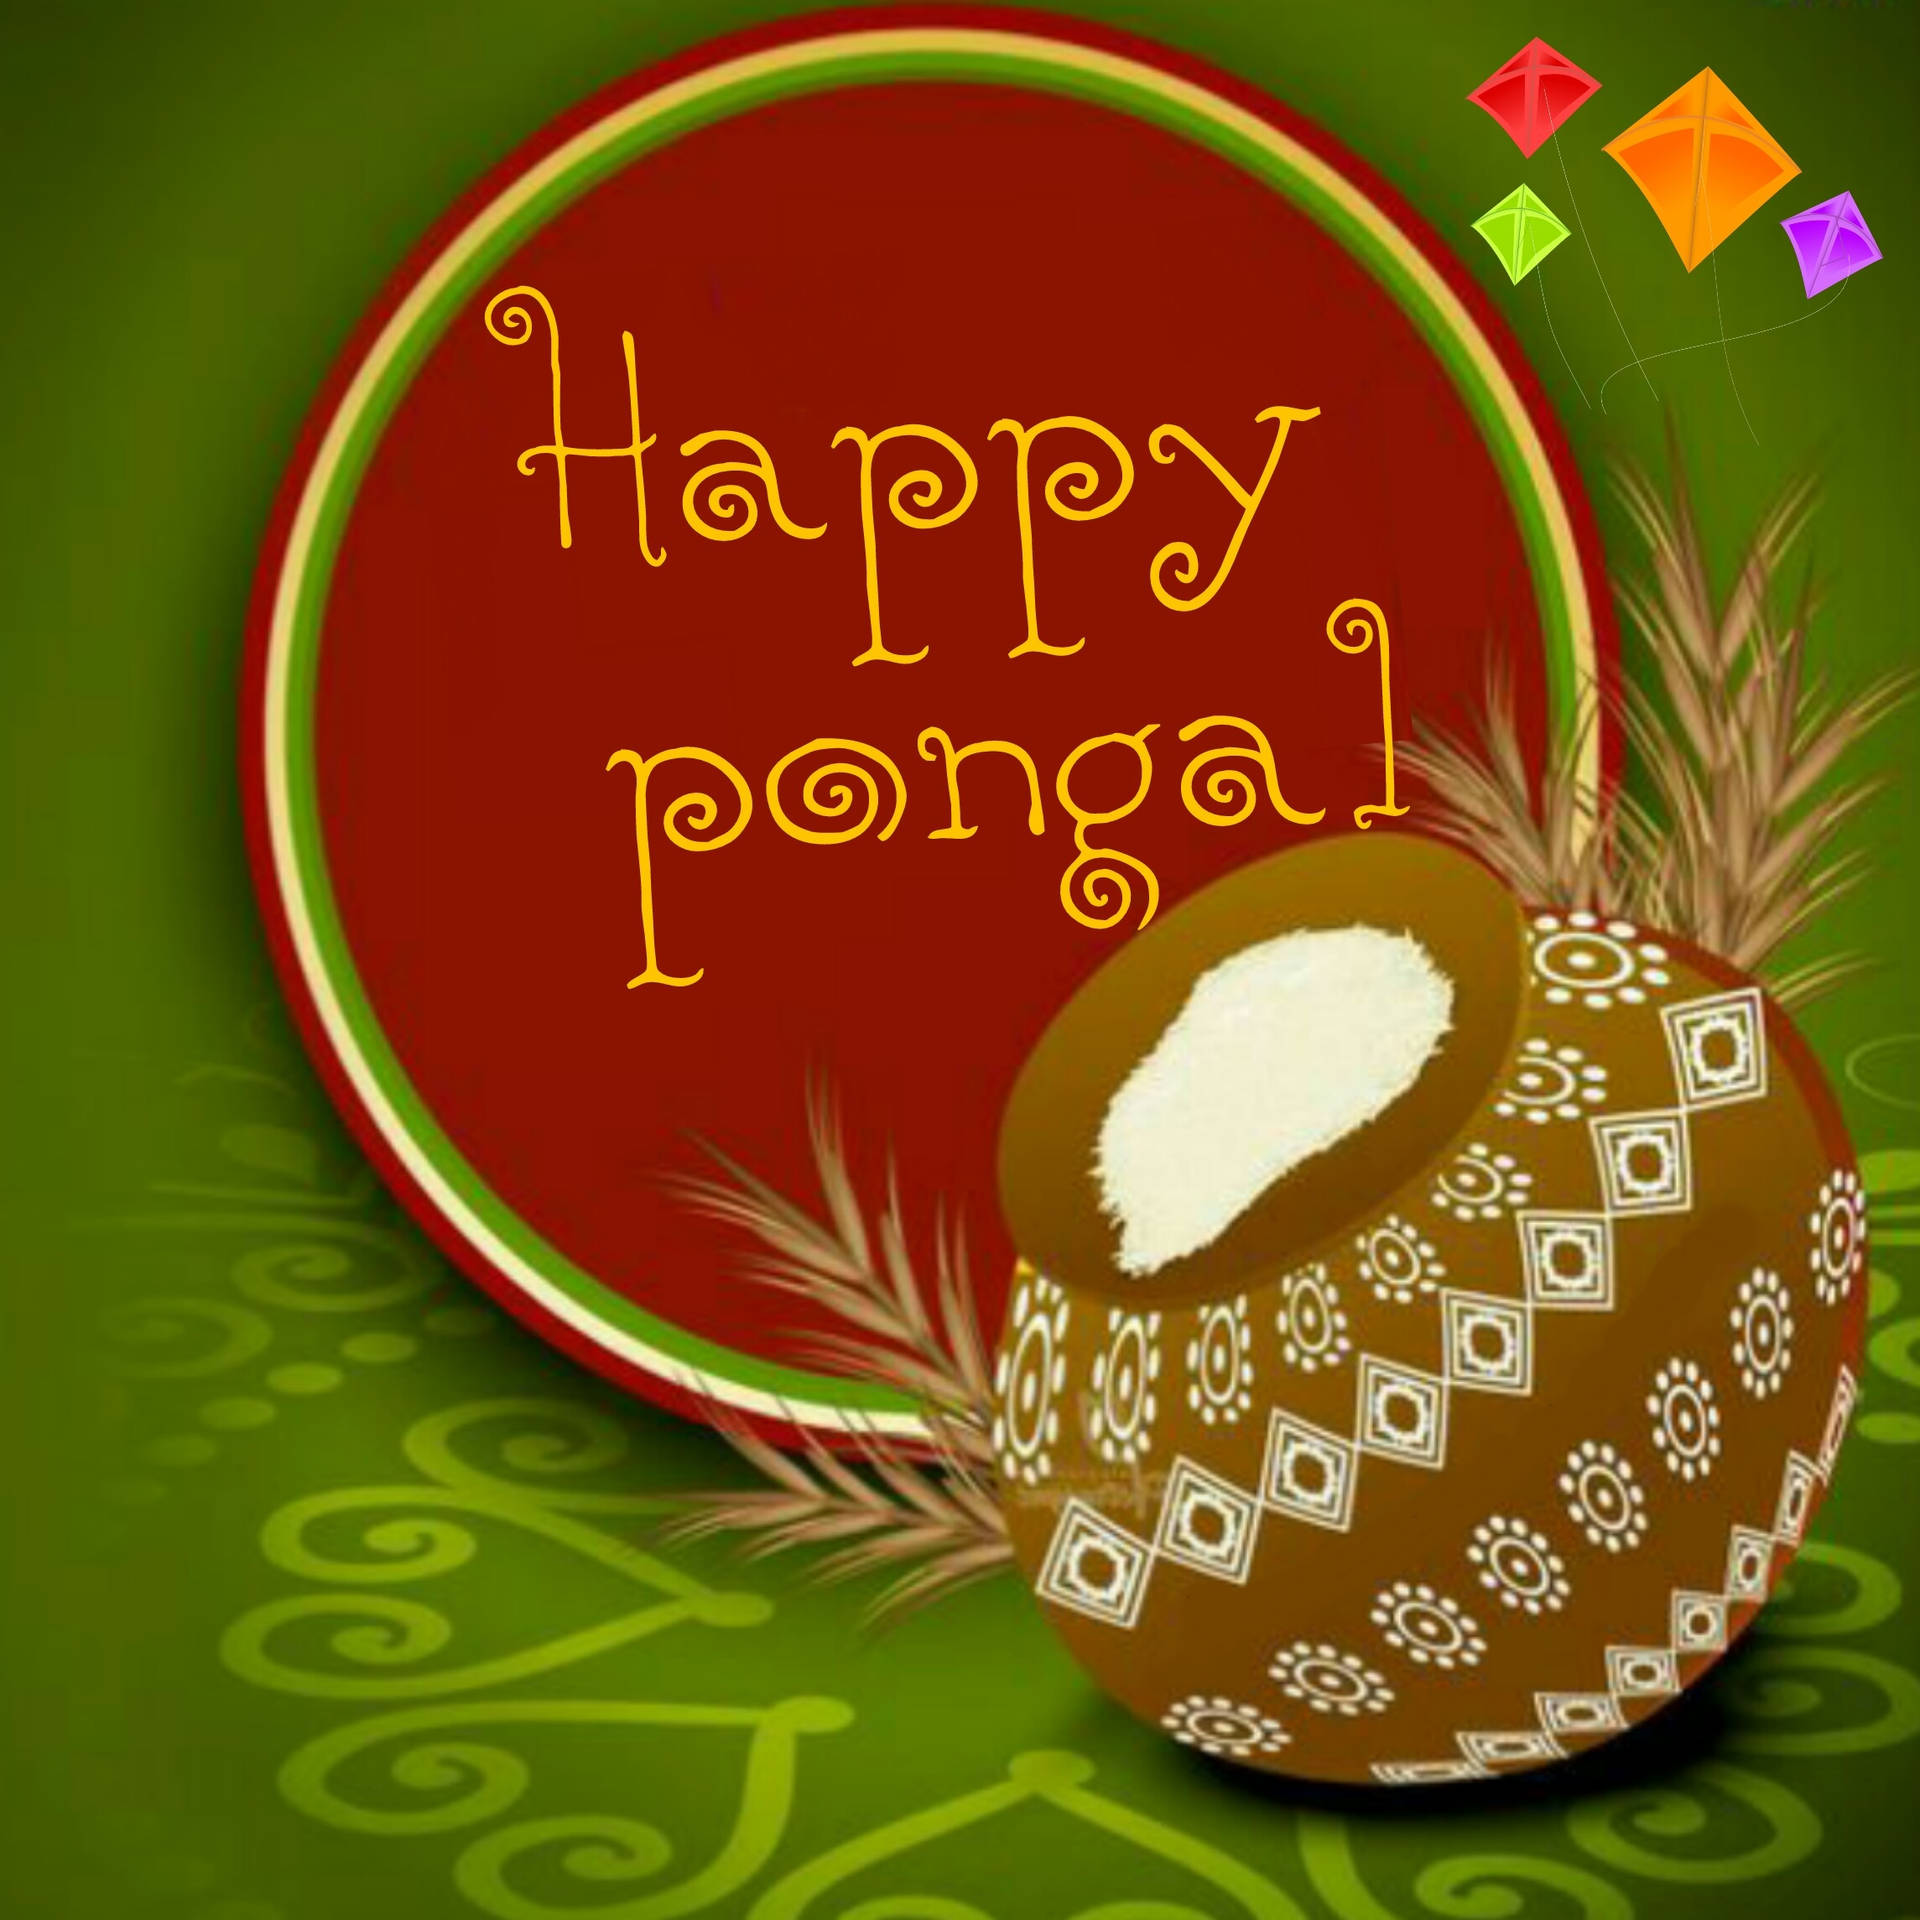 Happy Pongal Festive Greetings Background